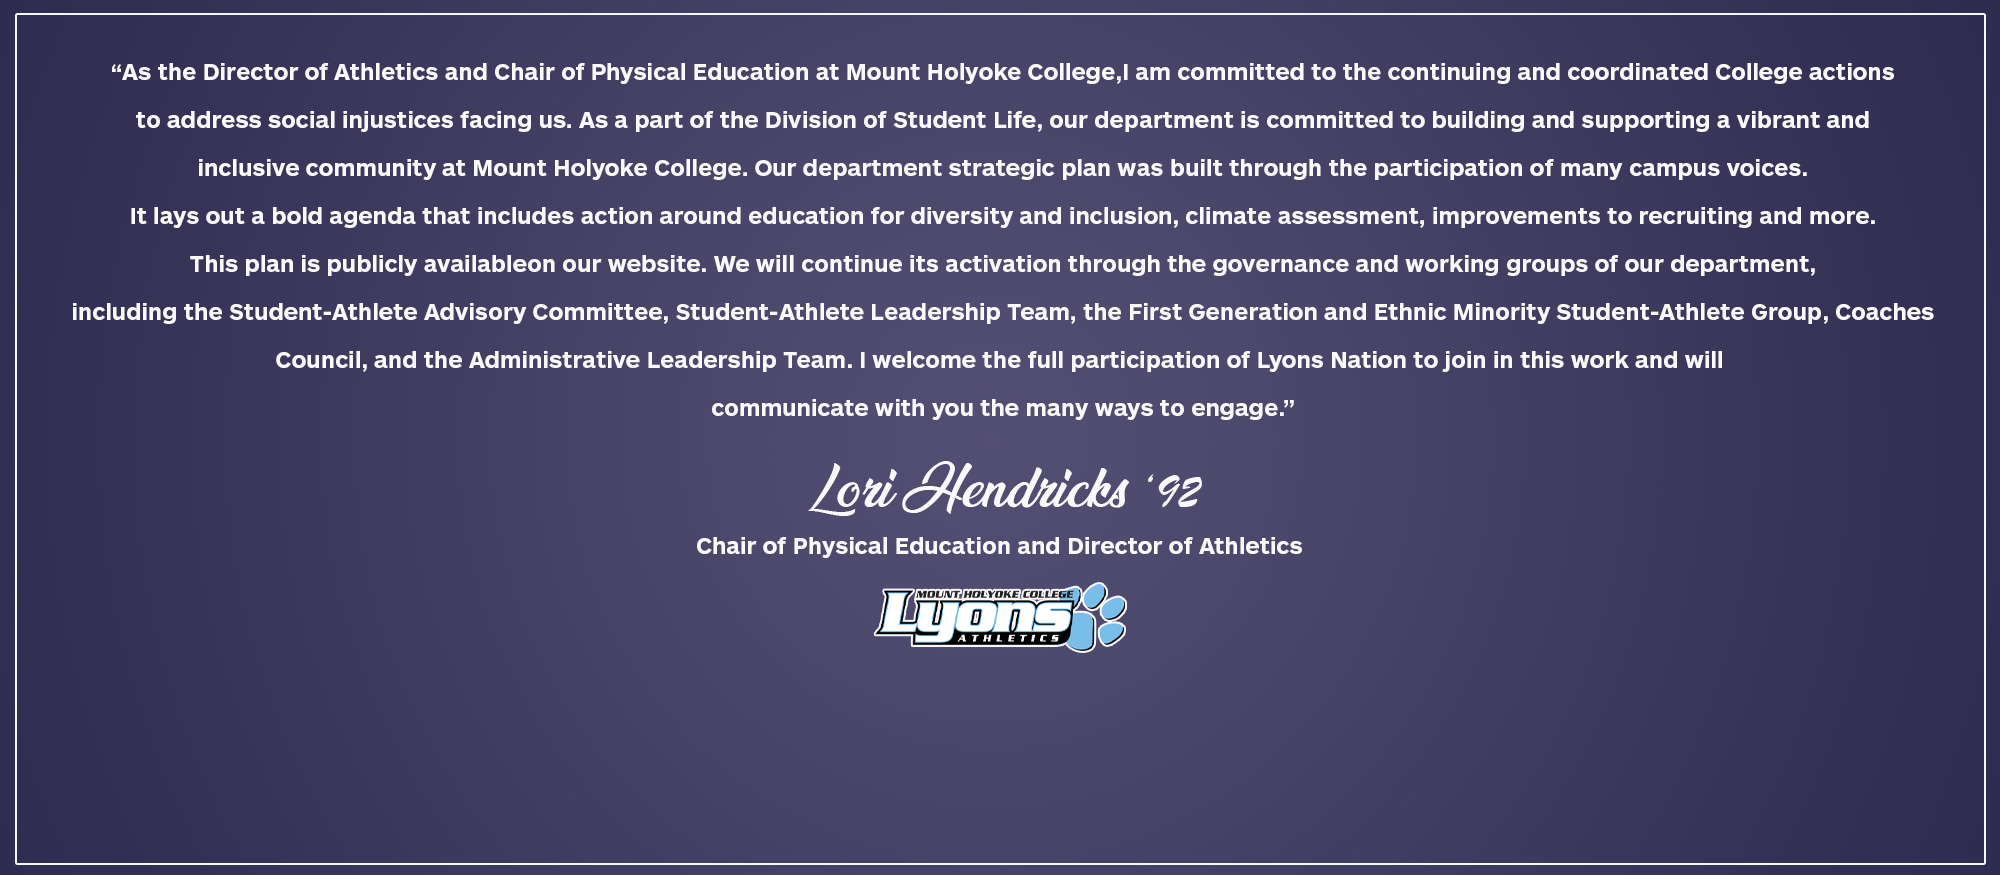 A Letter from Mount Holyoke College Director of Athletics, Lori Hendricks '92